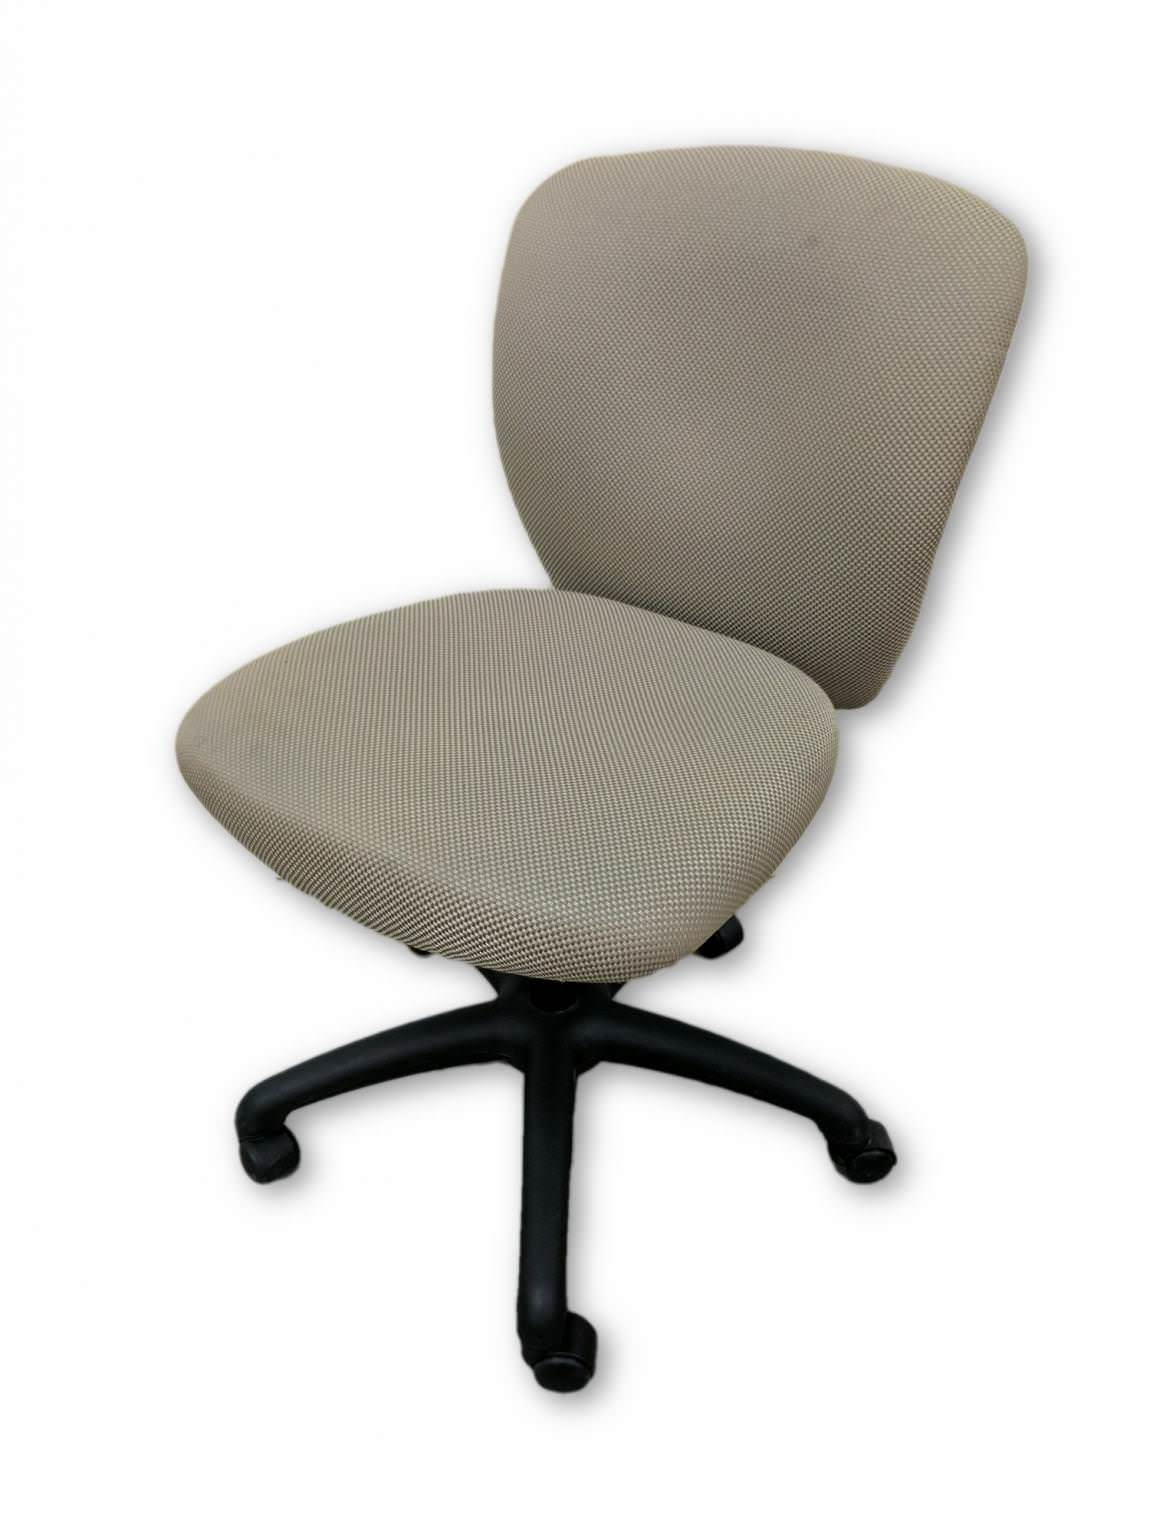 https://madisonliquidators.com/images/p/1150/1611-sitonit-seating-rolling-office-chair-without-arms-1.jpg